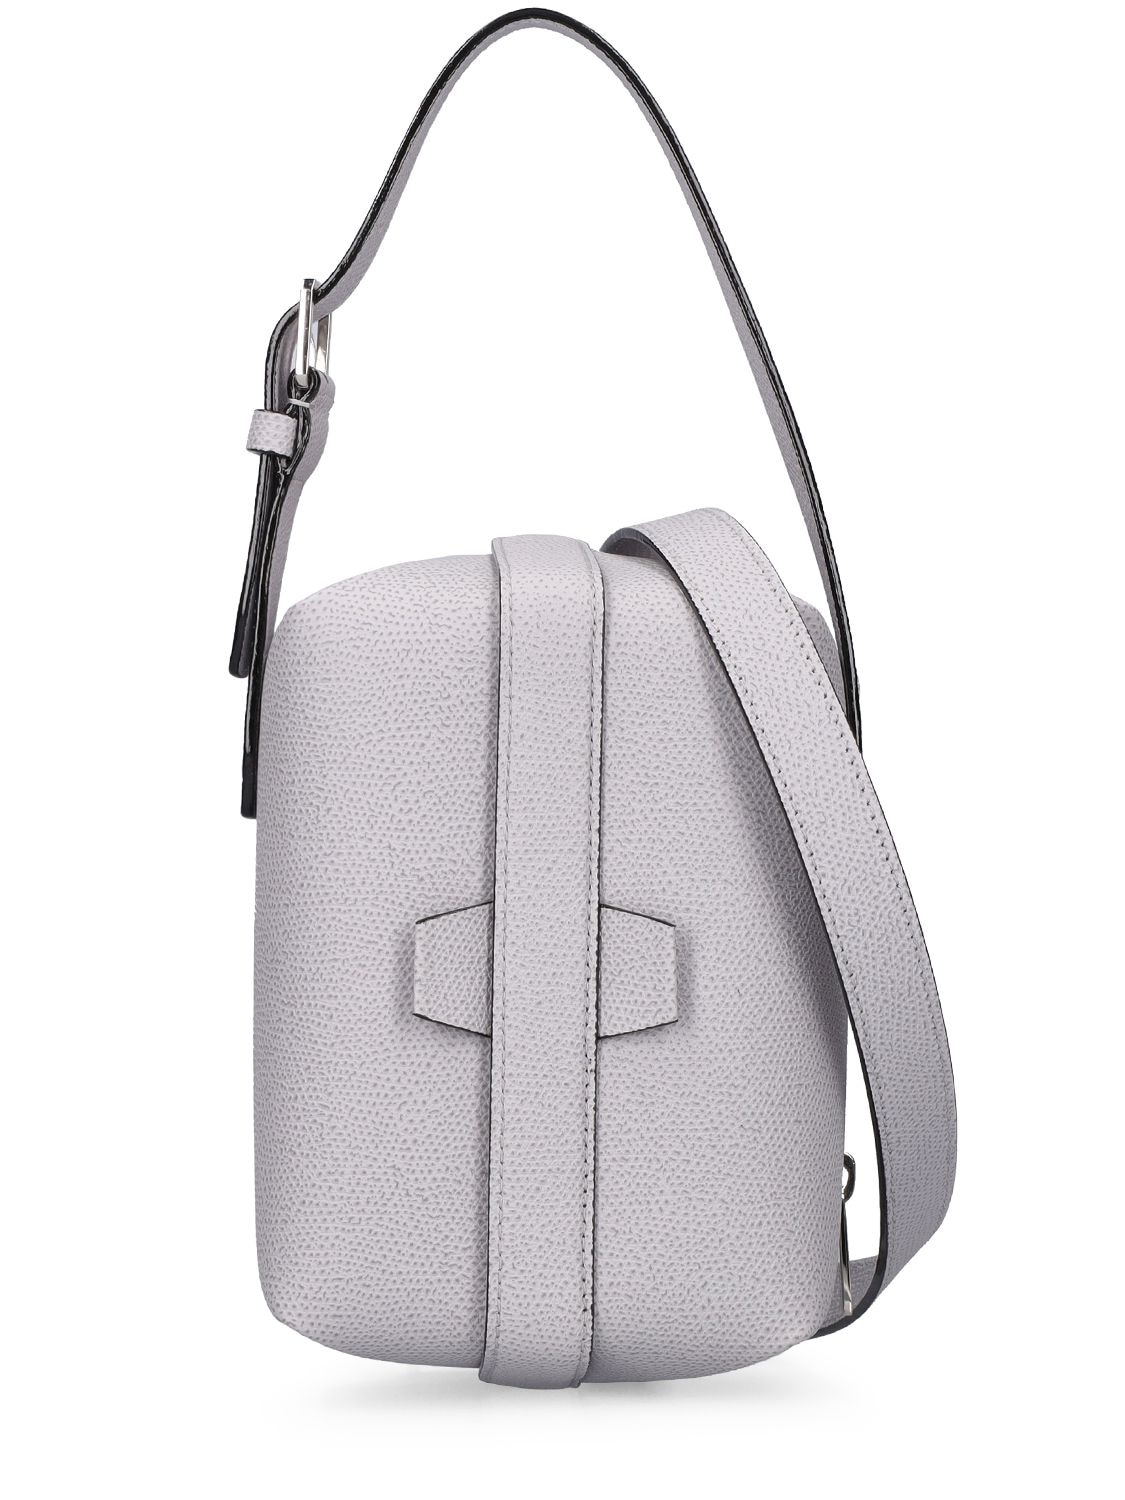 Valextra New Tric Trac Grained Leather Bag In Stone Gt